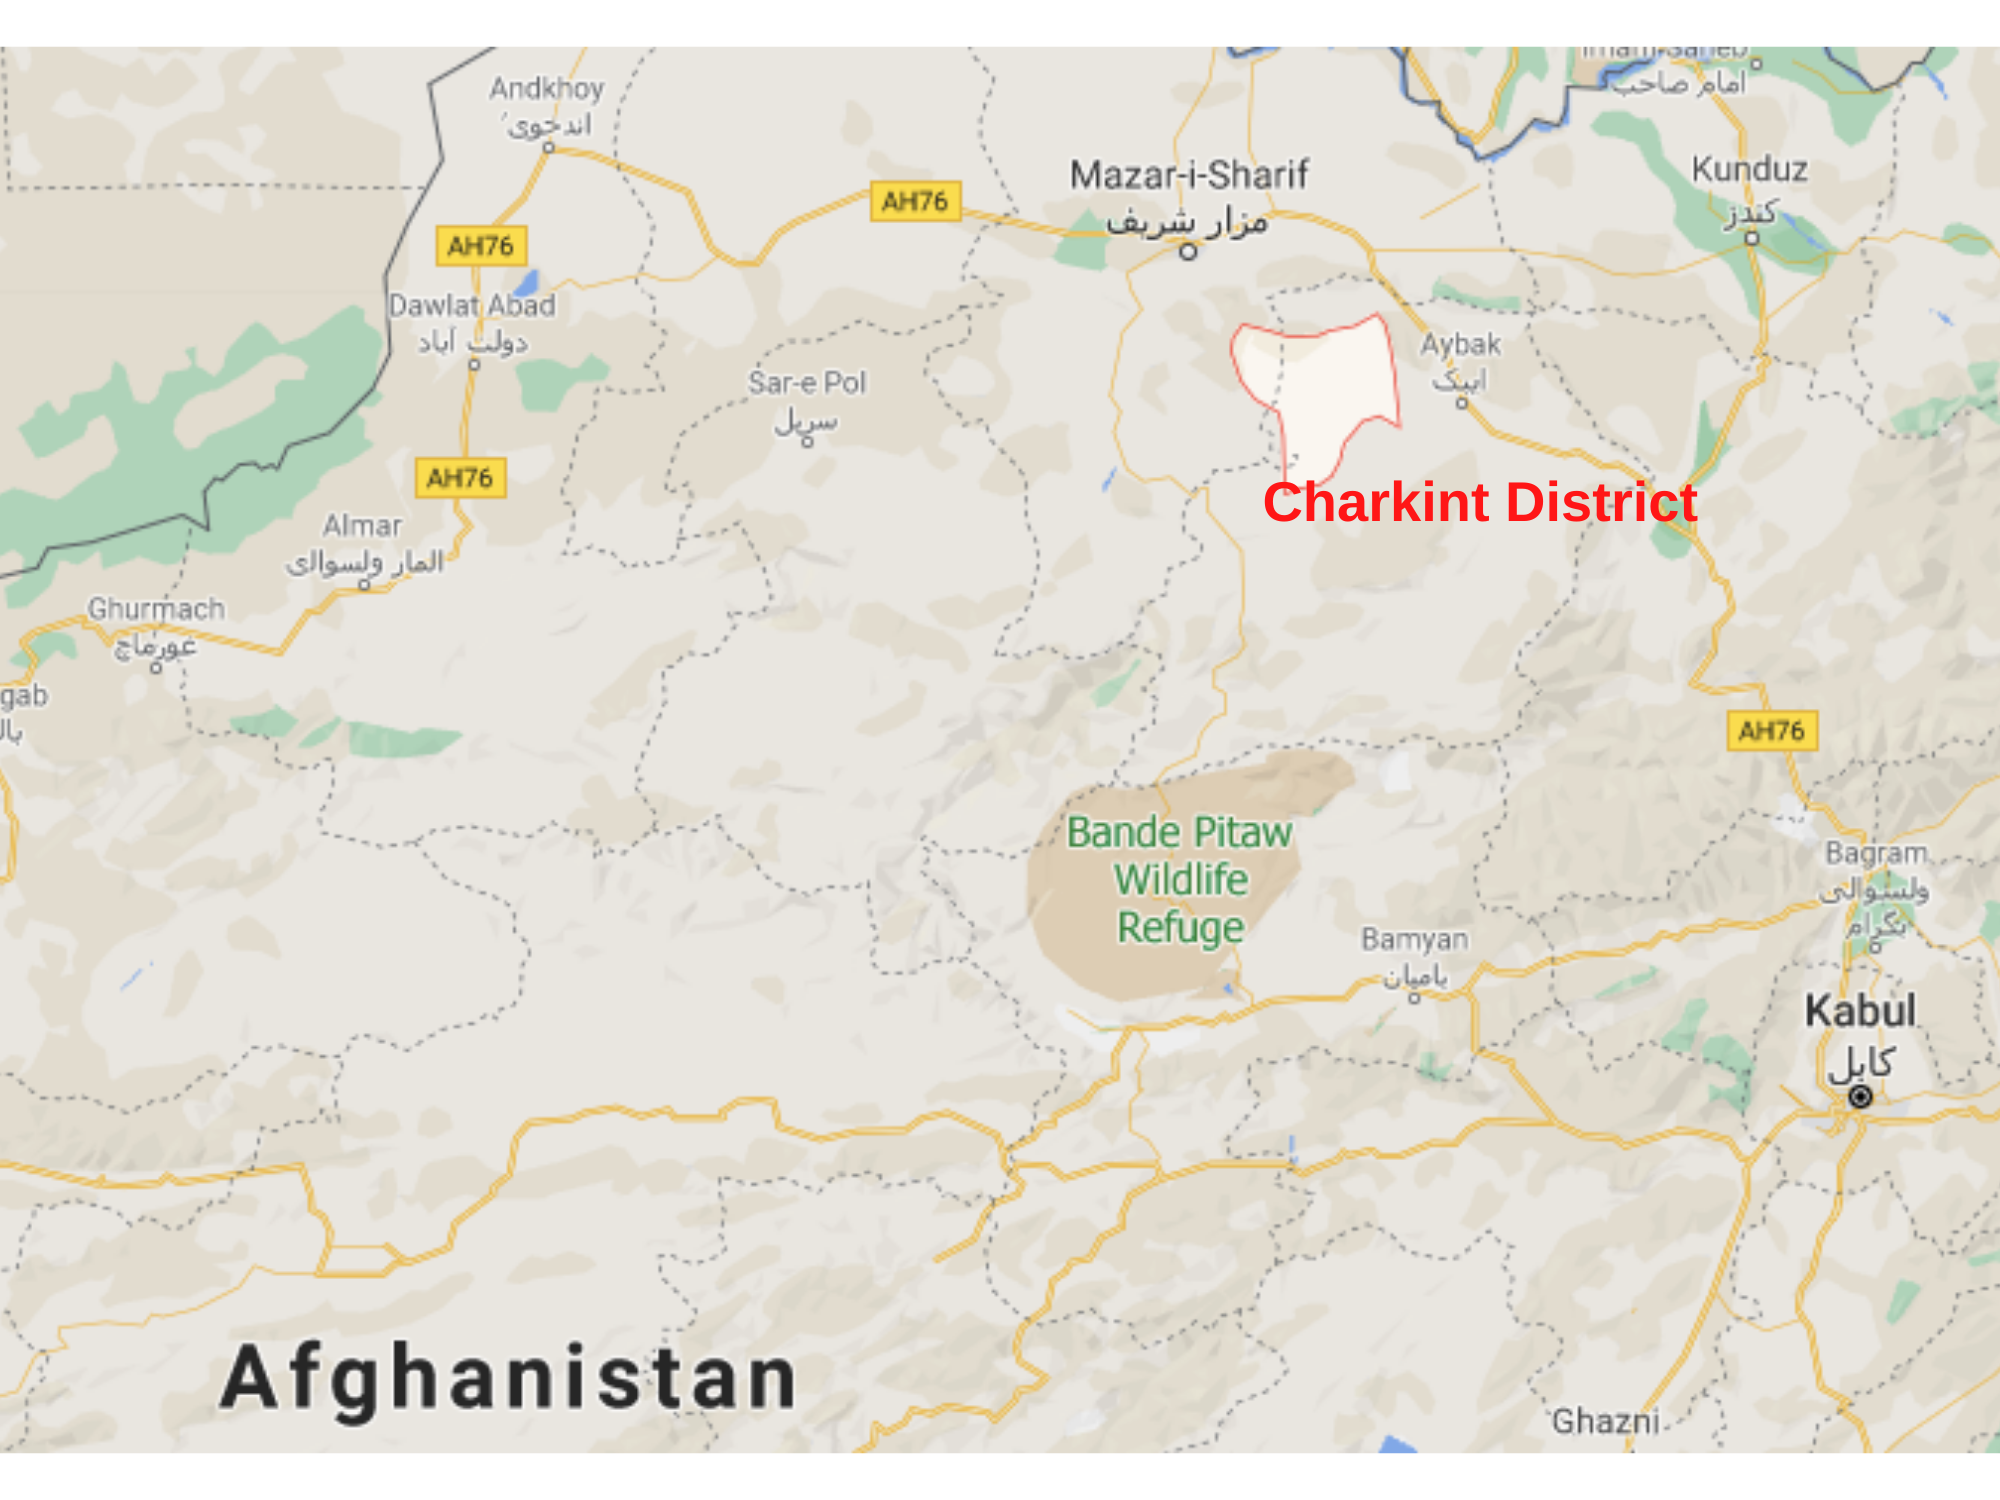 Map of Afghanistan showing where Charkint district is.